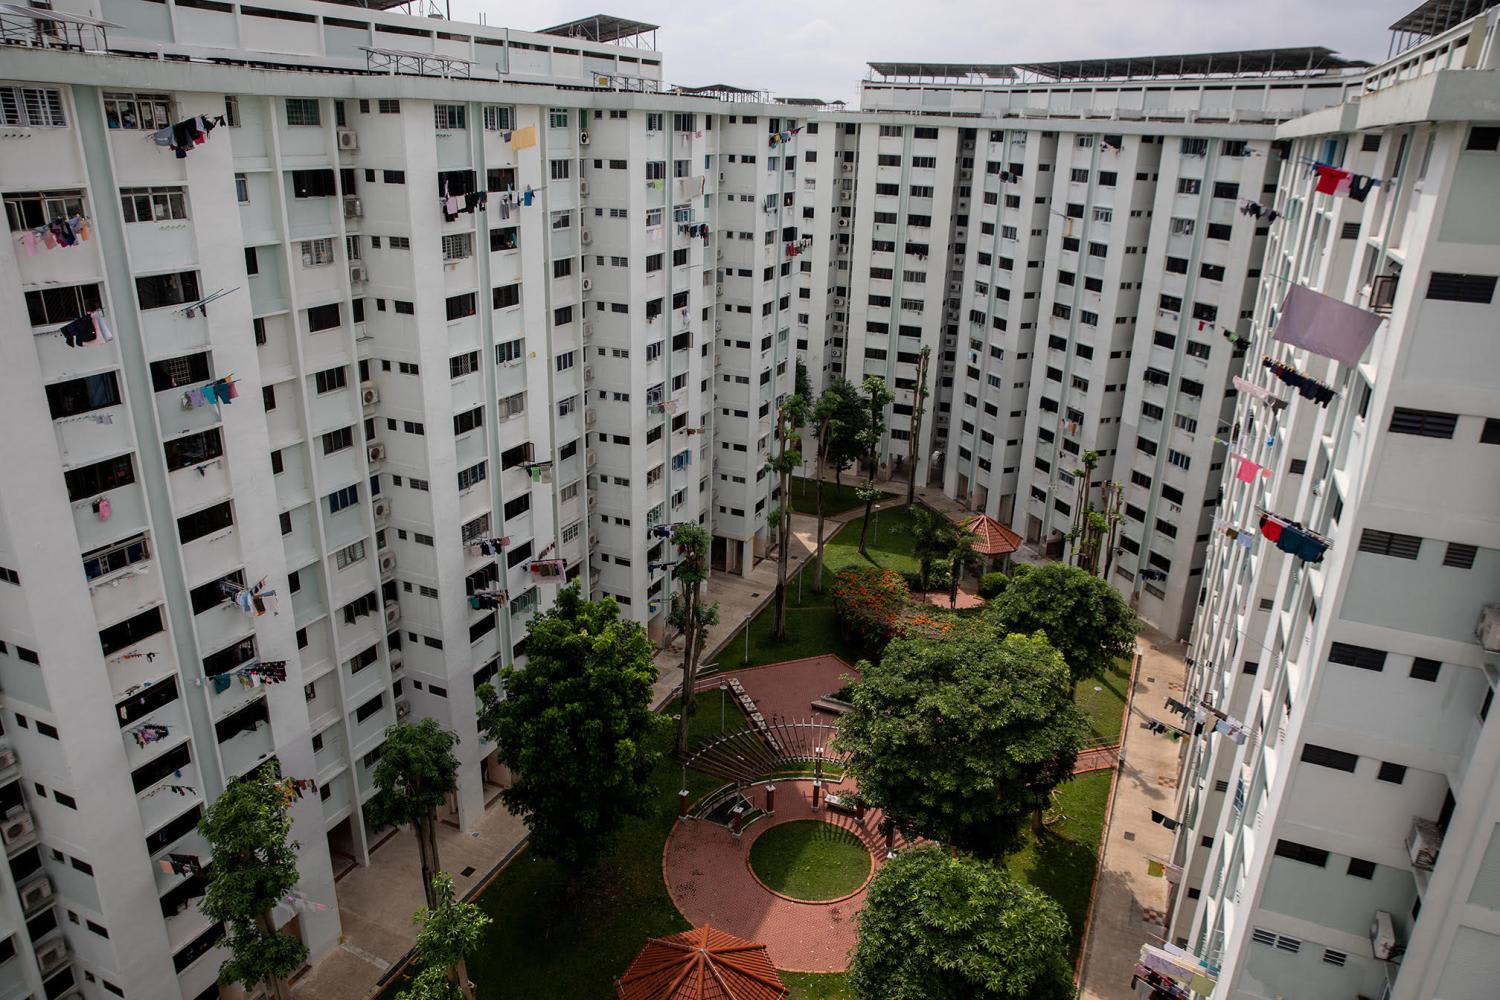 Flats at&nbsp;Ang&nbsp;Mo&nbsp;Kio&nbsp;Ave 3 that are selected for the Selective En bloc Redevelopment Scheme (Sers).